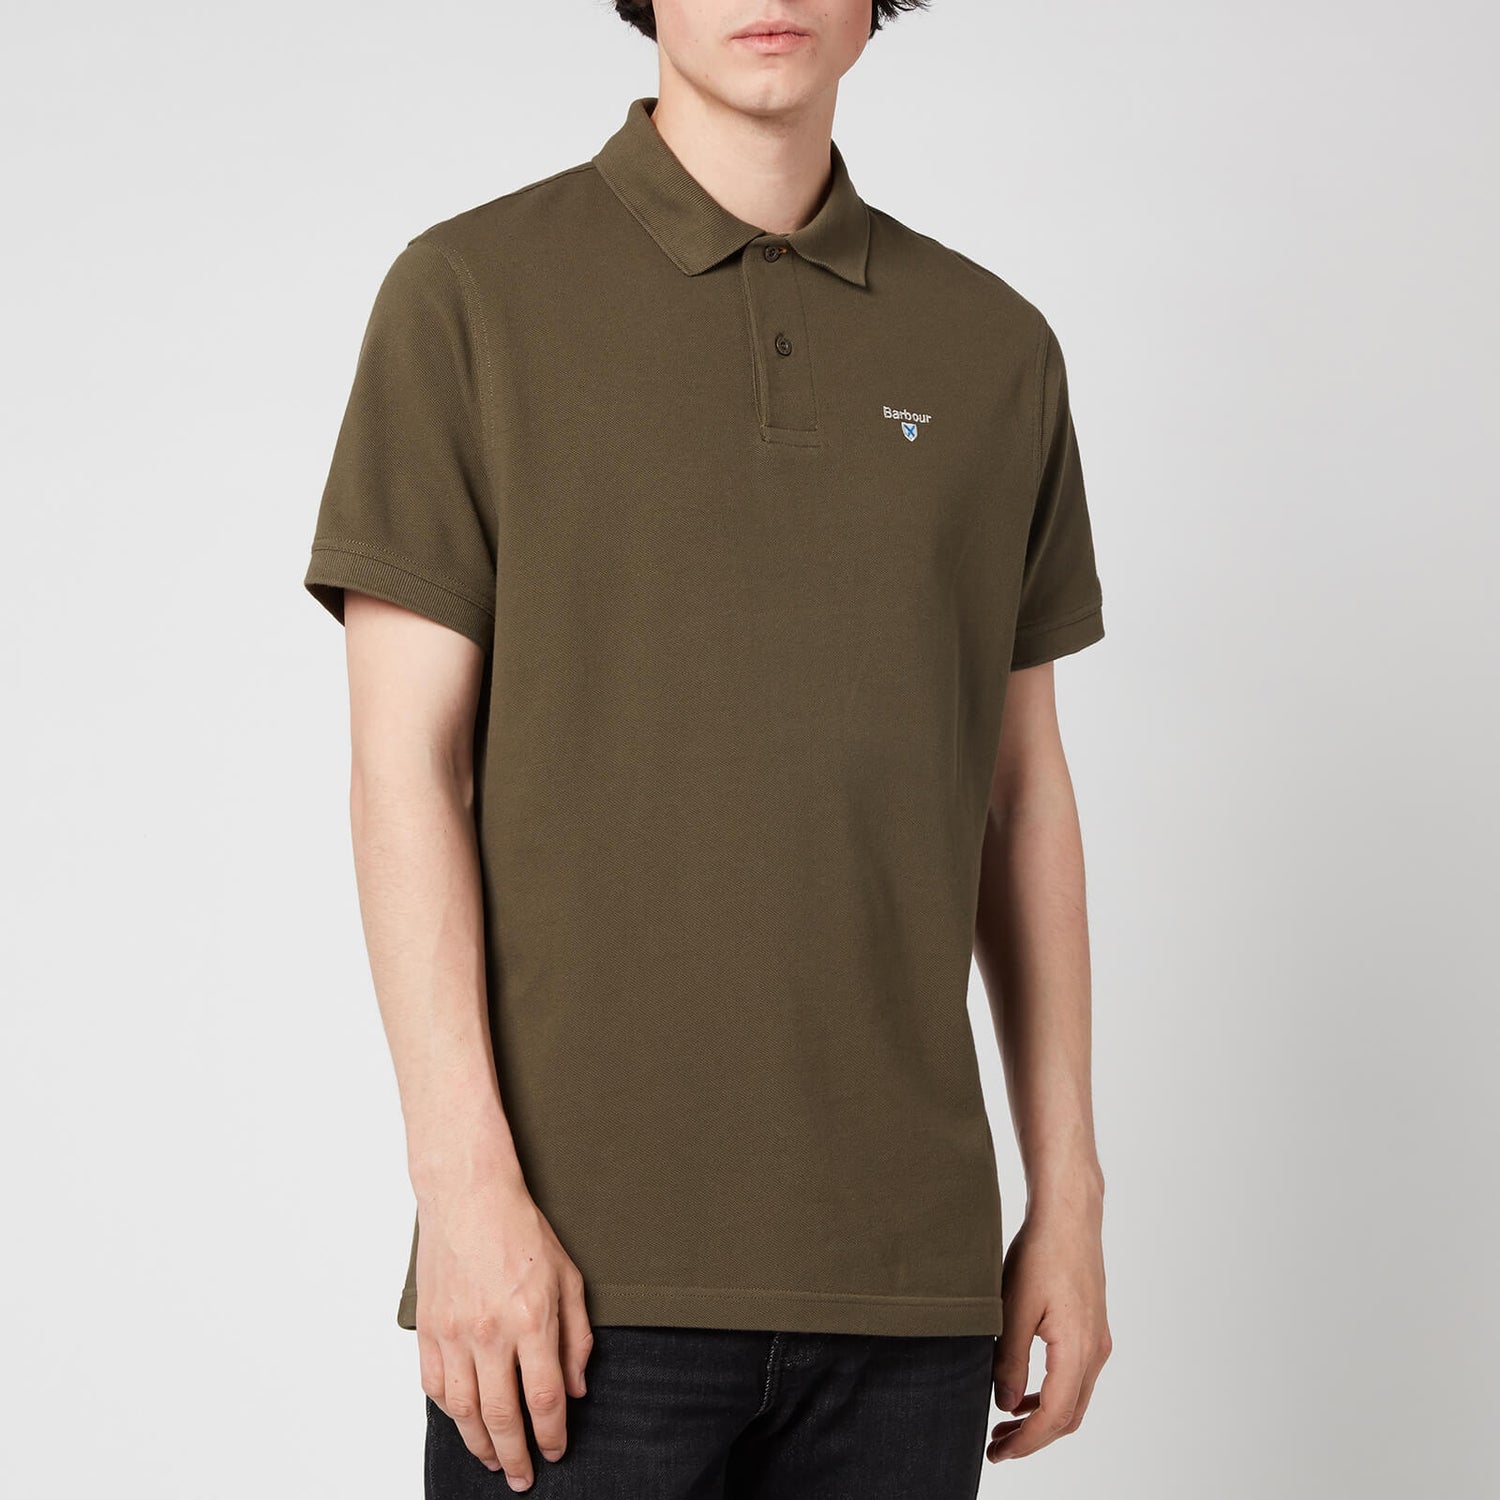 Barbour Heritage Men's Sports Polo Shirt - Olive - S